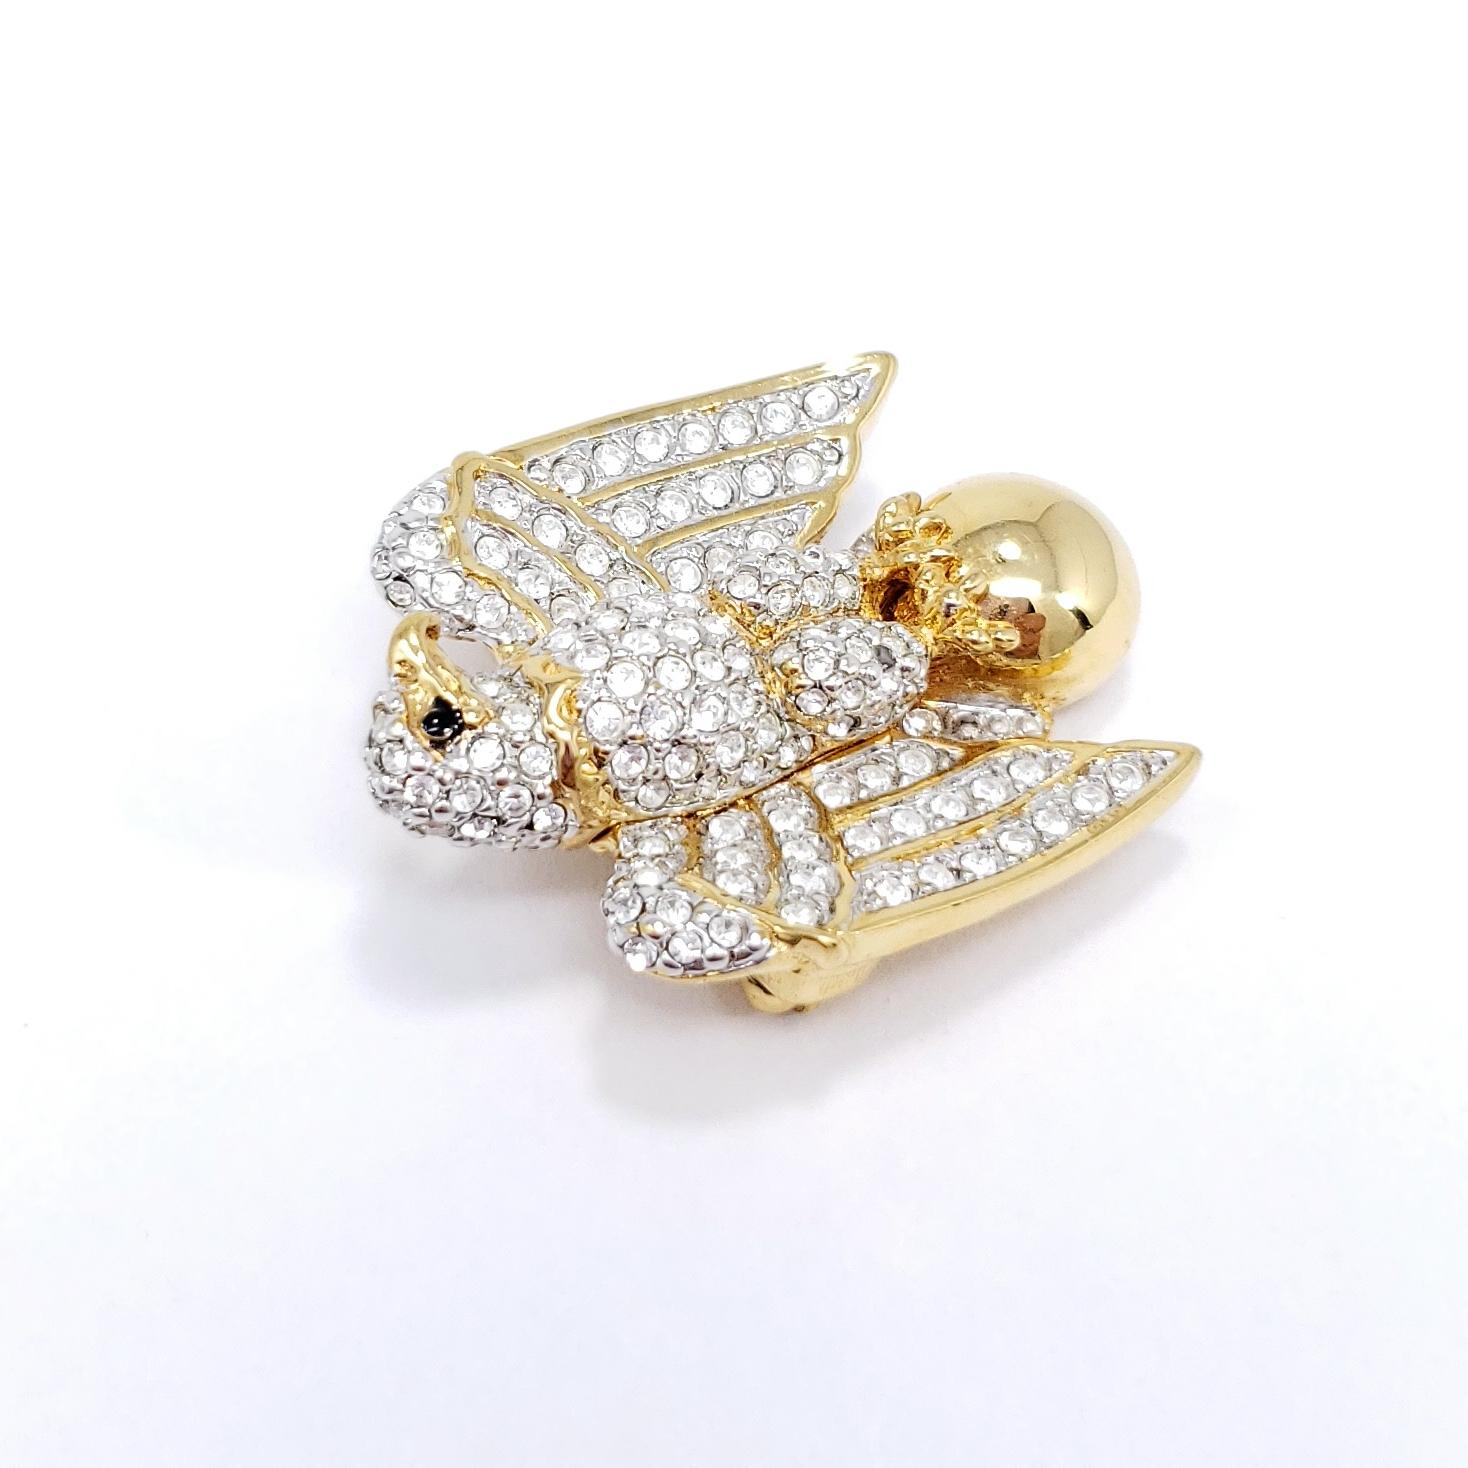 A regal pin brooch in gold. This eagle is decorated with clear Swarovski crystals for a sparkling, glamorous, look.

Gold plated.

Hallmarks: Swarovski Swan